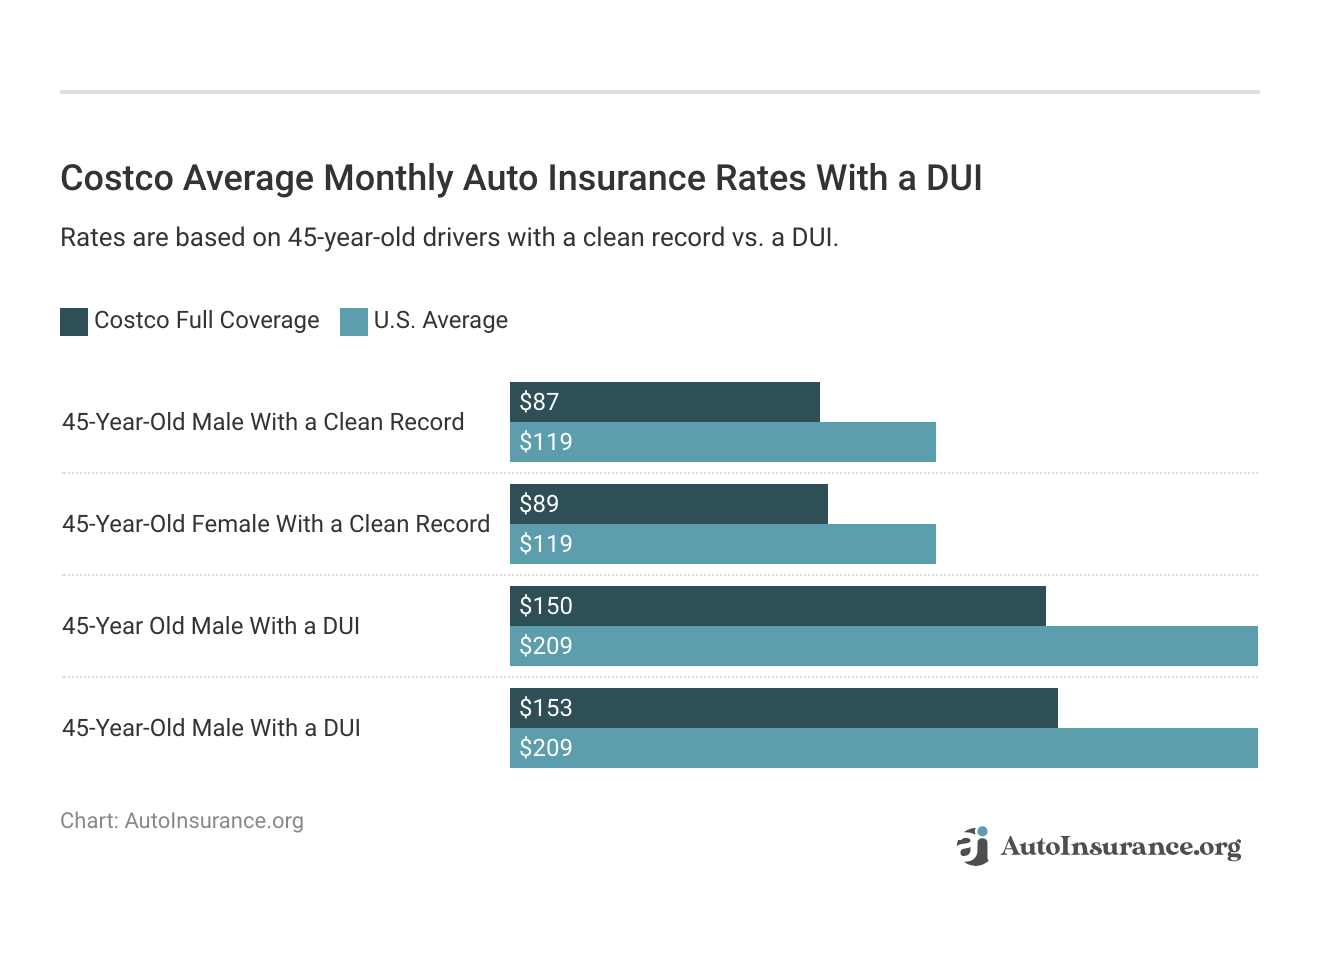 <h3>Costco Average Monthly Auto Insurance Rates With a DUI</h3>